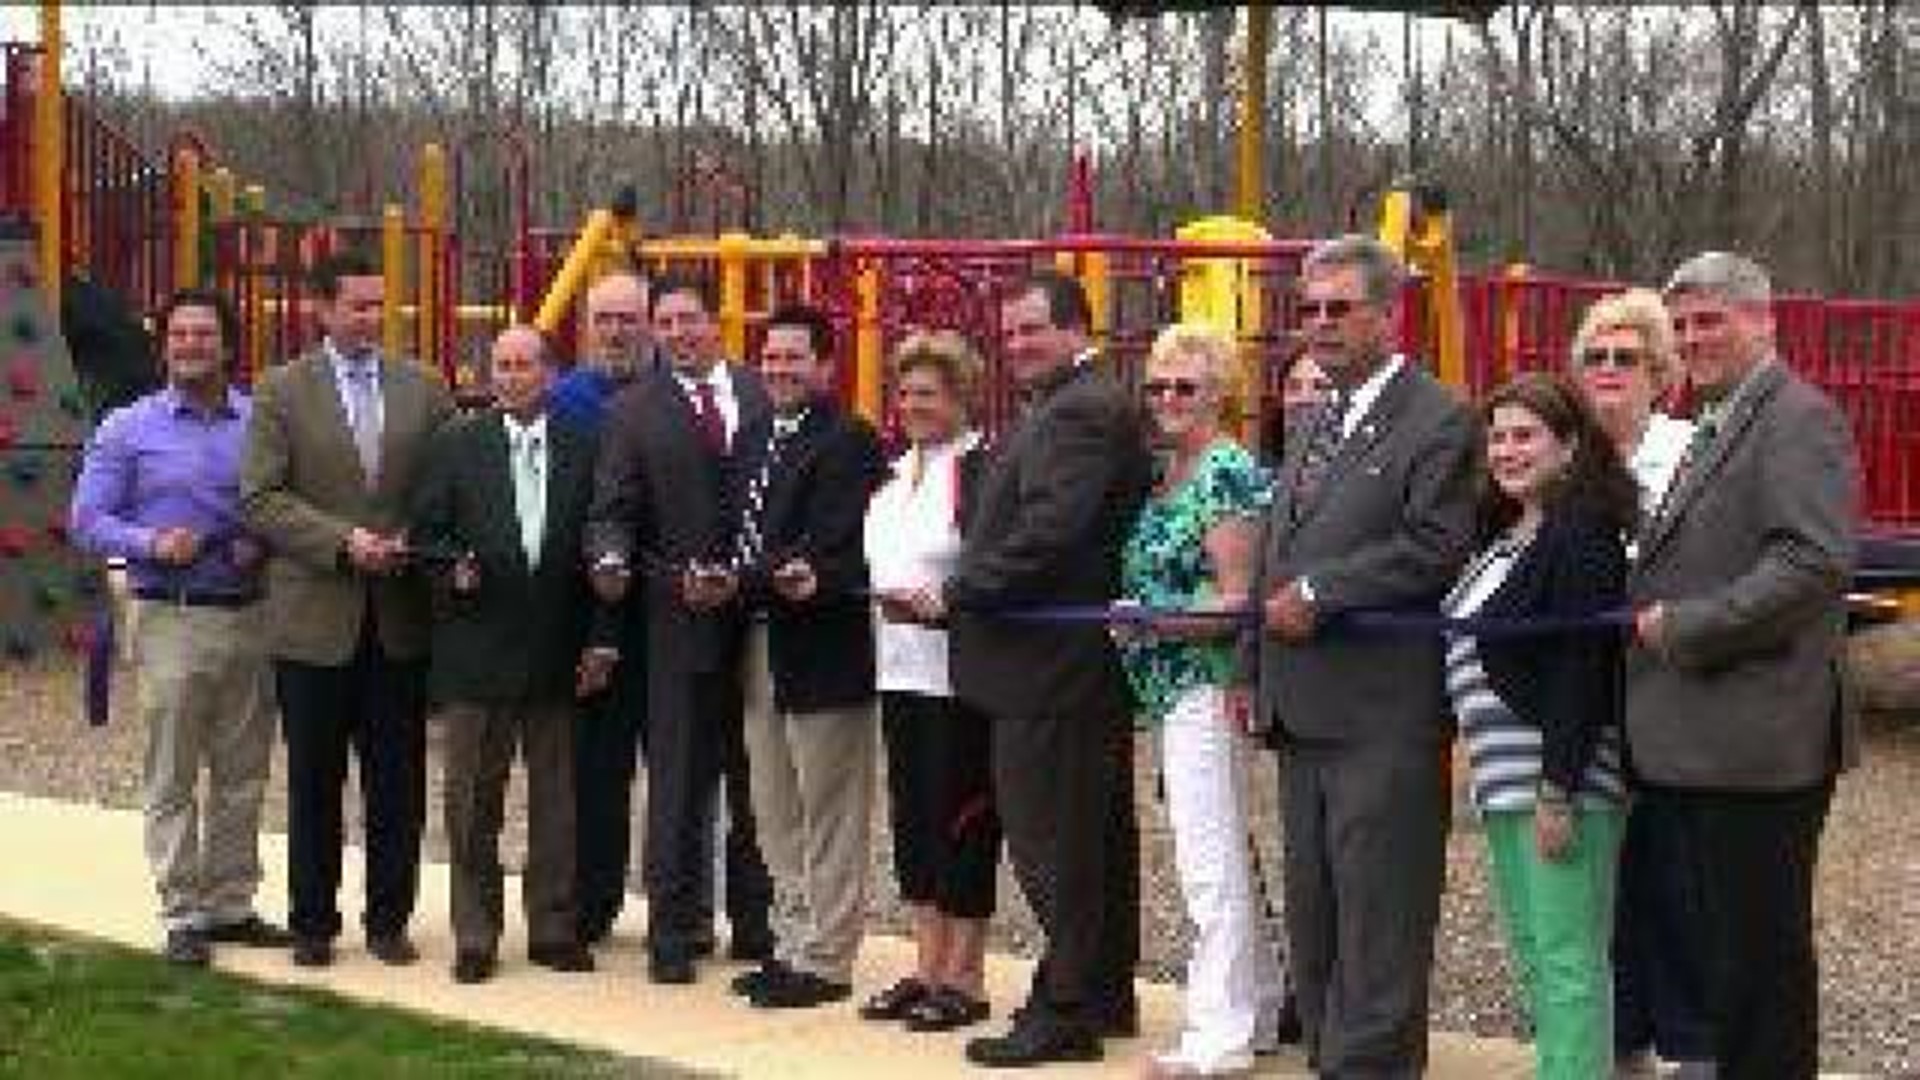 Ribbon Cutting Marks Next Step in Playground Project